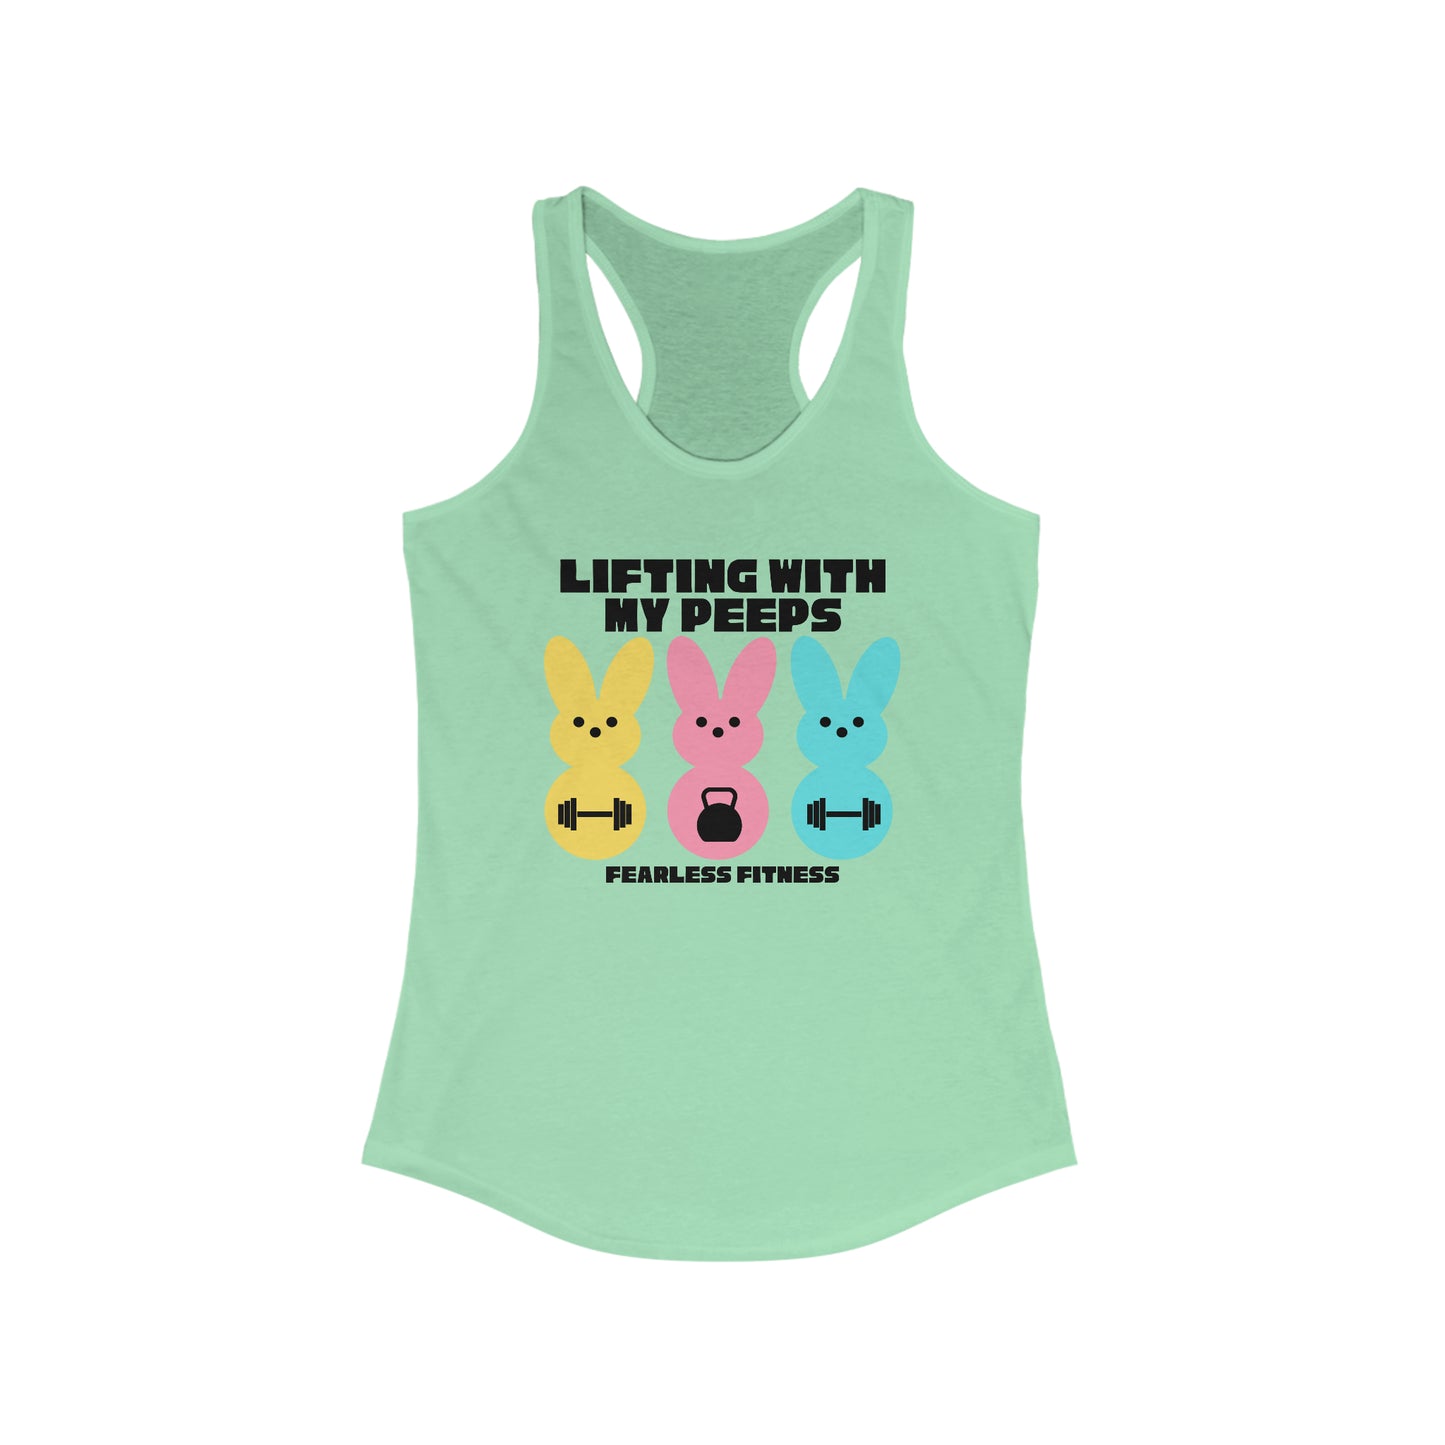 Lifting with My Peeps - Fearless Fitness - Racerback Tank